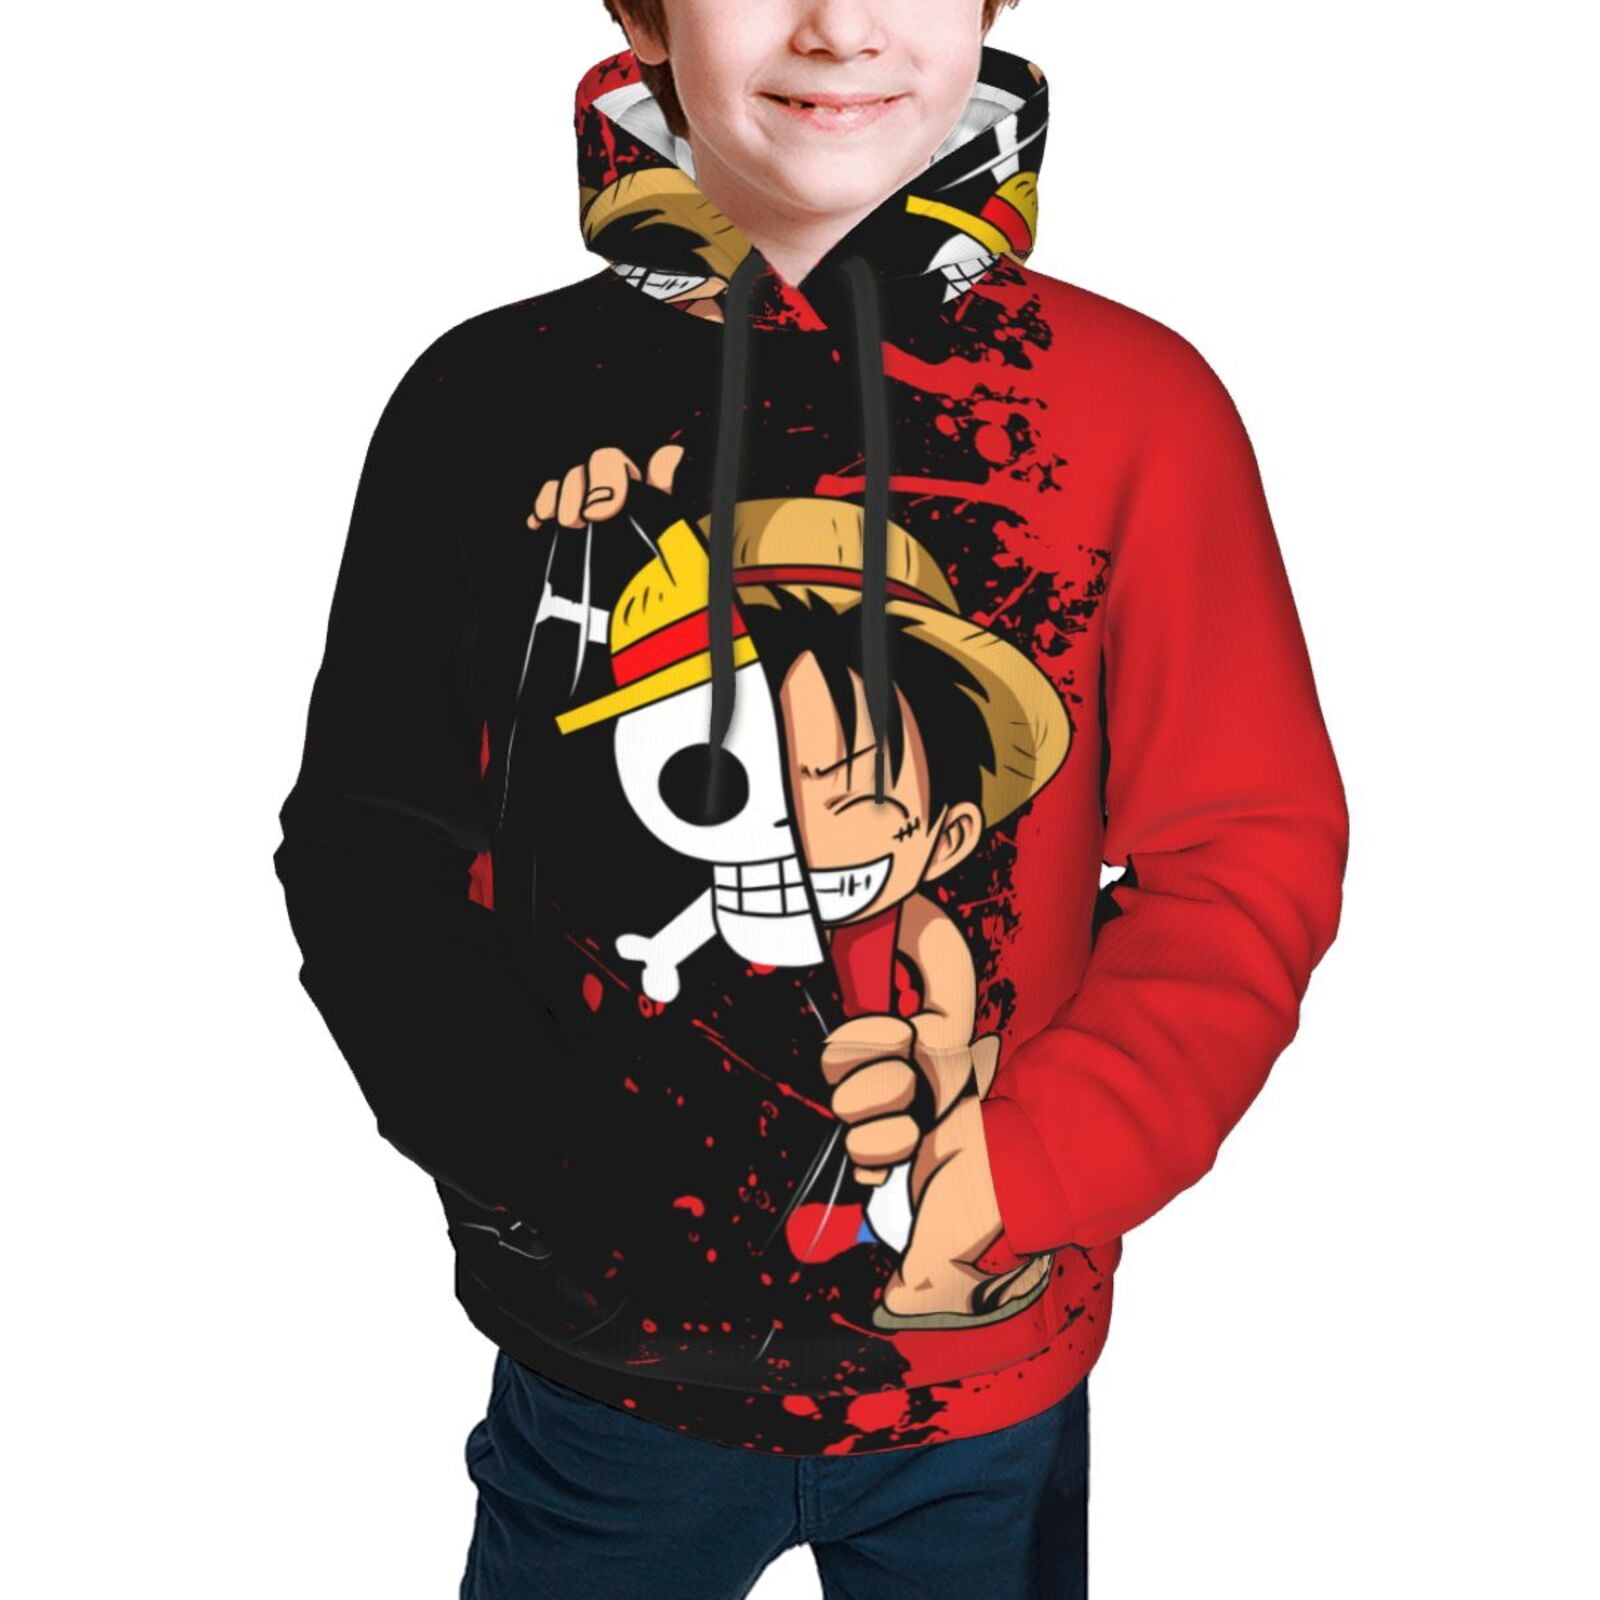 ONE PIECE ANIME CHARACTERS 3D HOODIE - by www.wesellanything.co